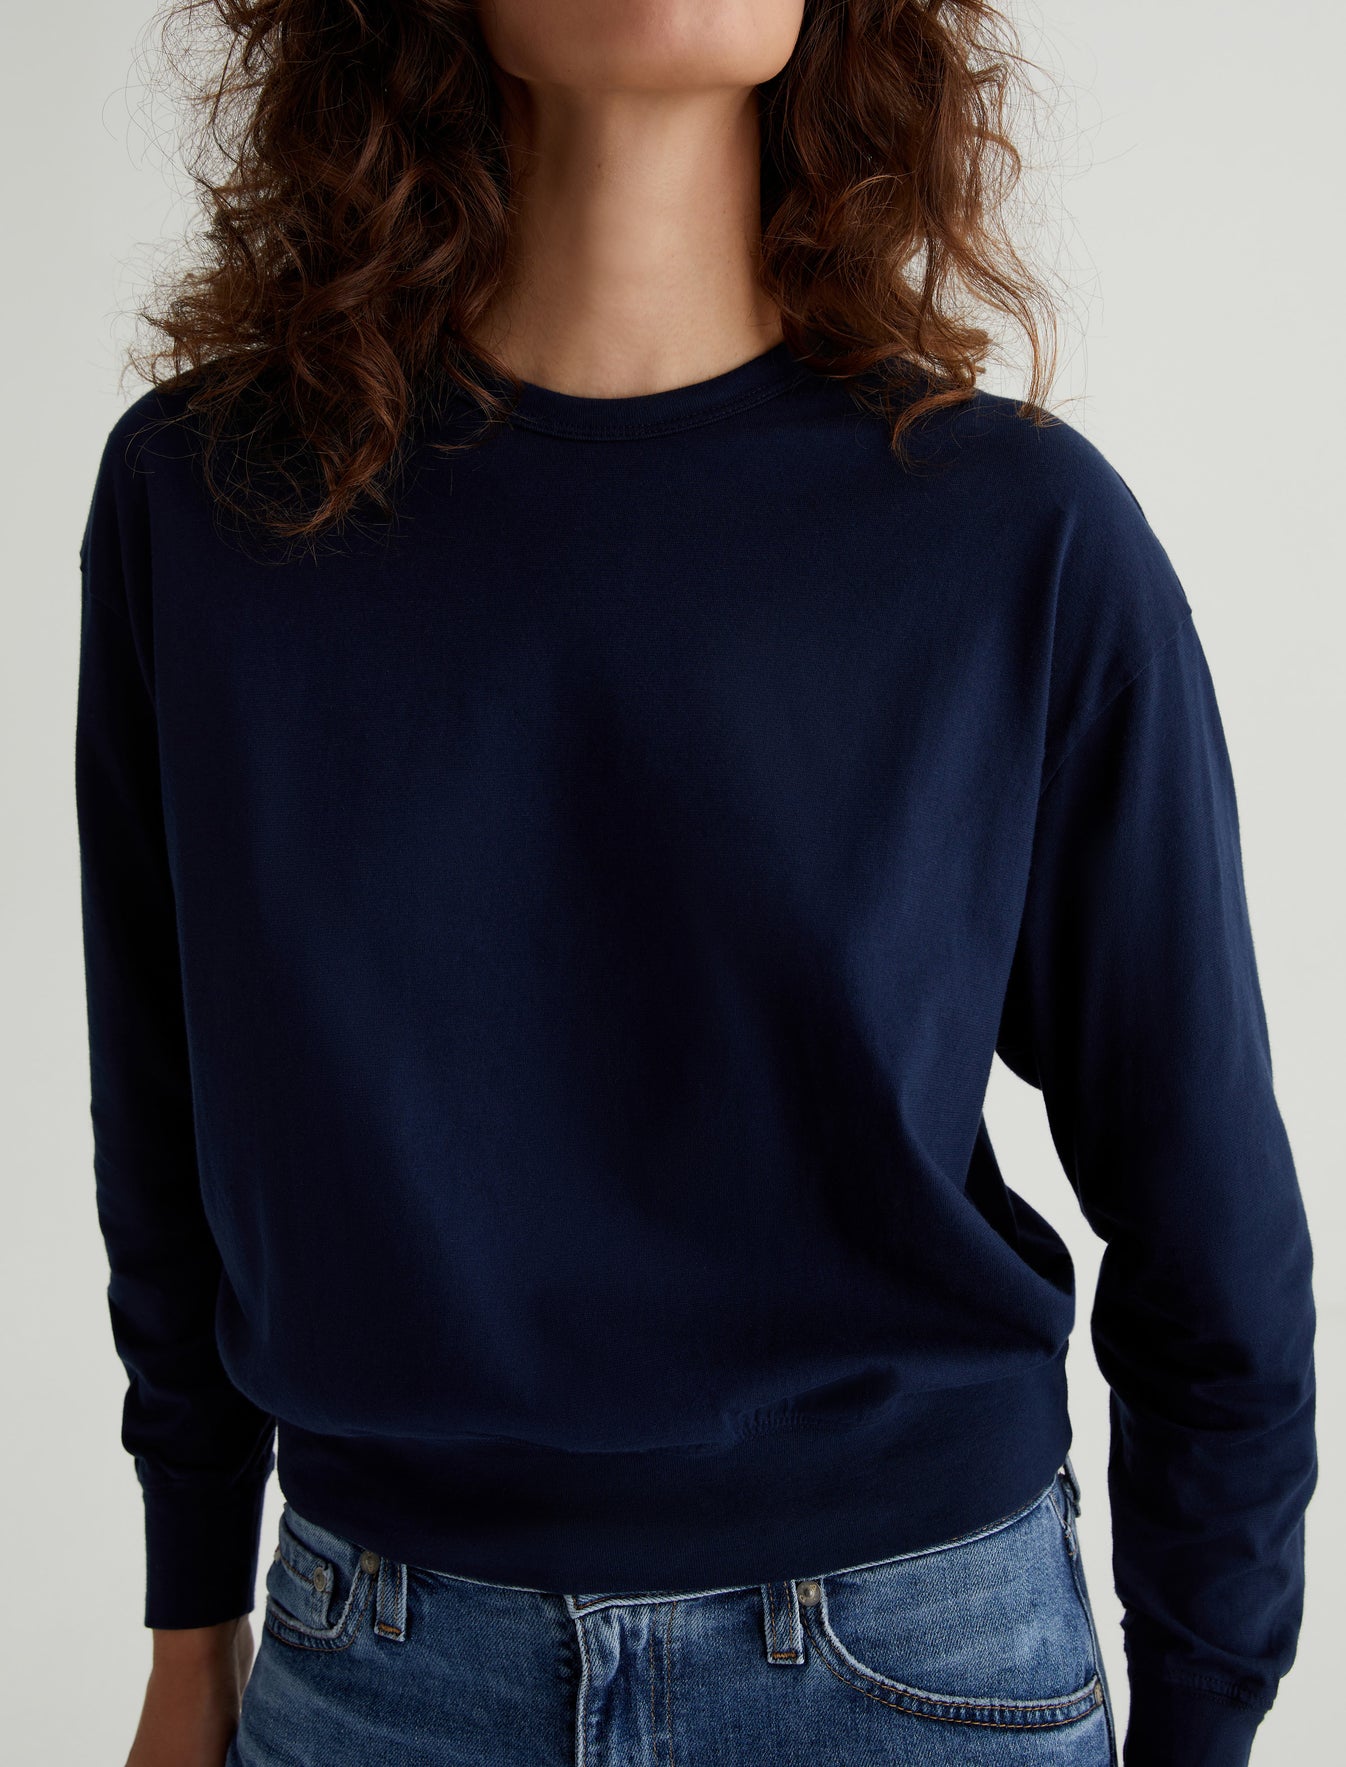 Karter Pullover Deep Navy Oversized Fit Long Sleeve Crew Neck Pullover Womens Top Photo 3